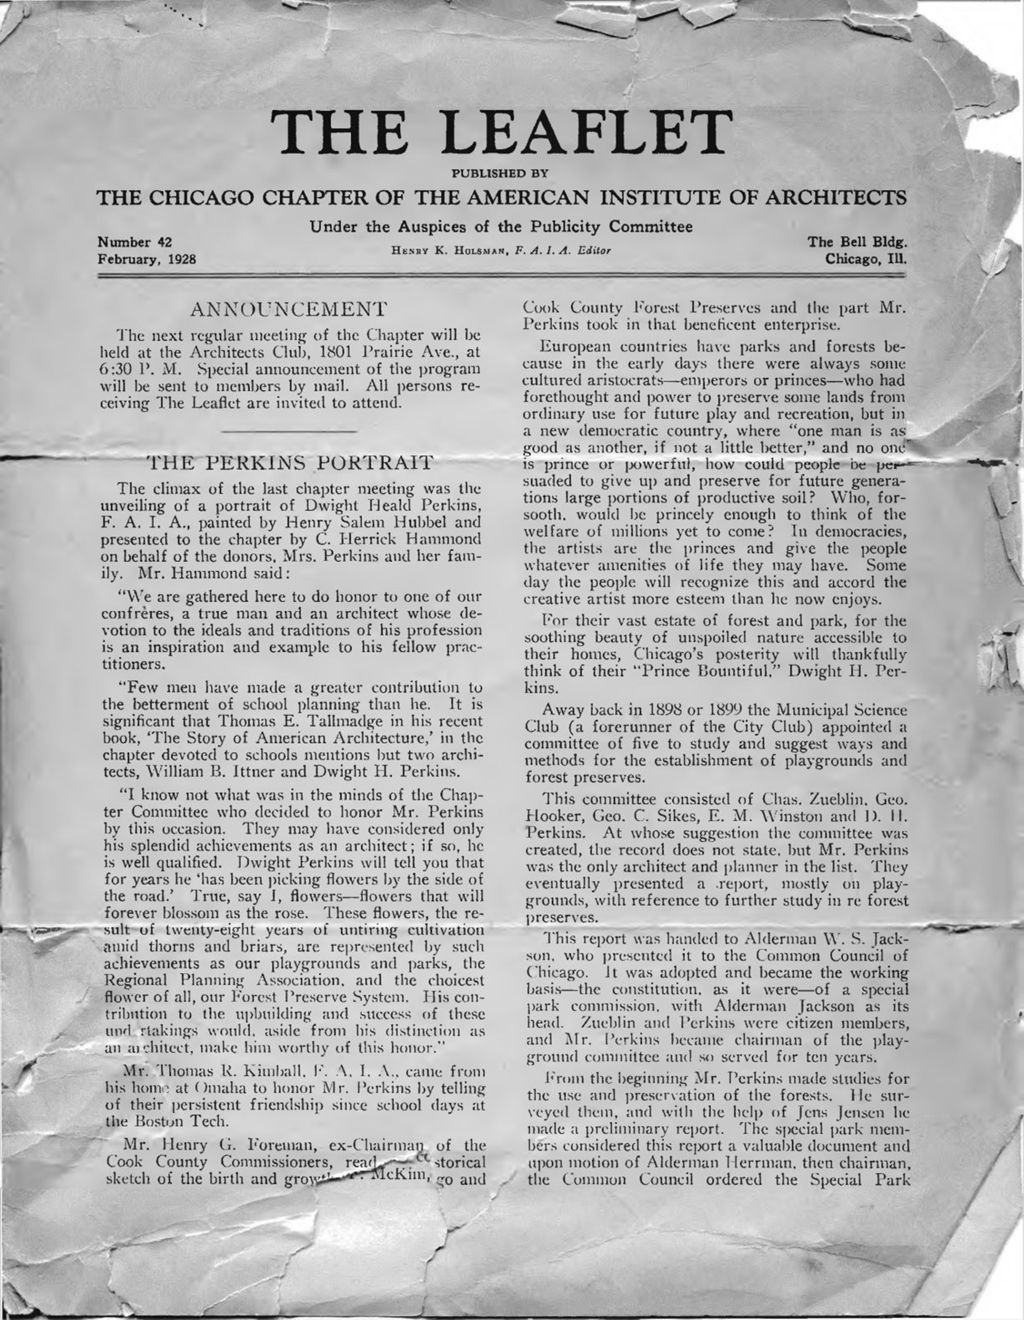 The Leaflet, newsletter for the Chicago Chapter of the American Institute of Architects, 1928